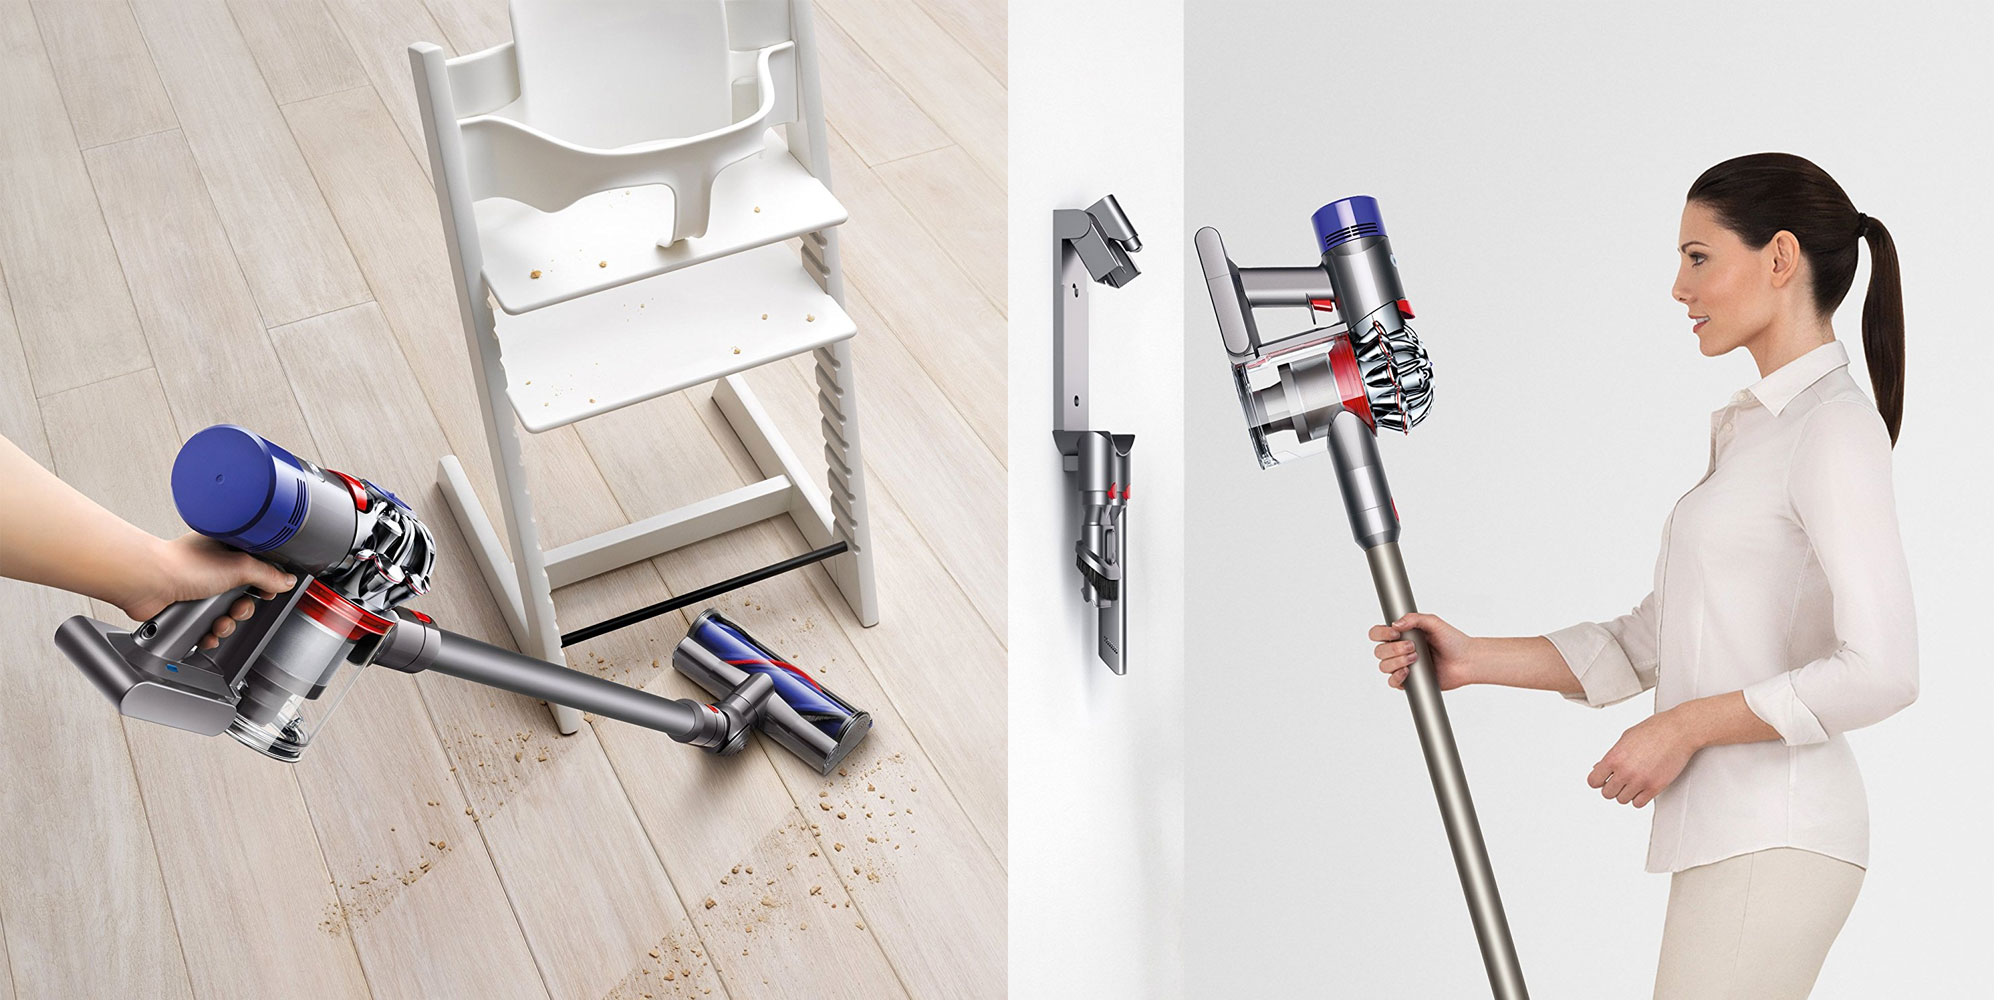 Keep the house clean w/ Dyson's V7 Animal Pro Cordless Vacuum for $255  (Reg. $300)